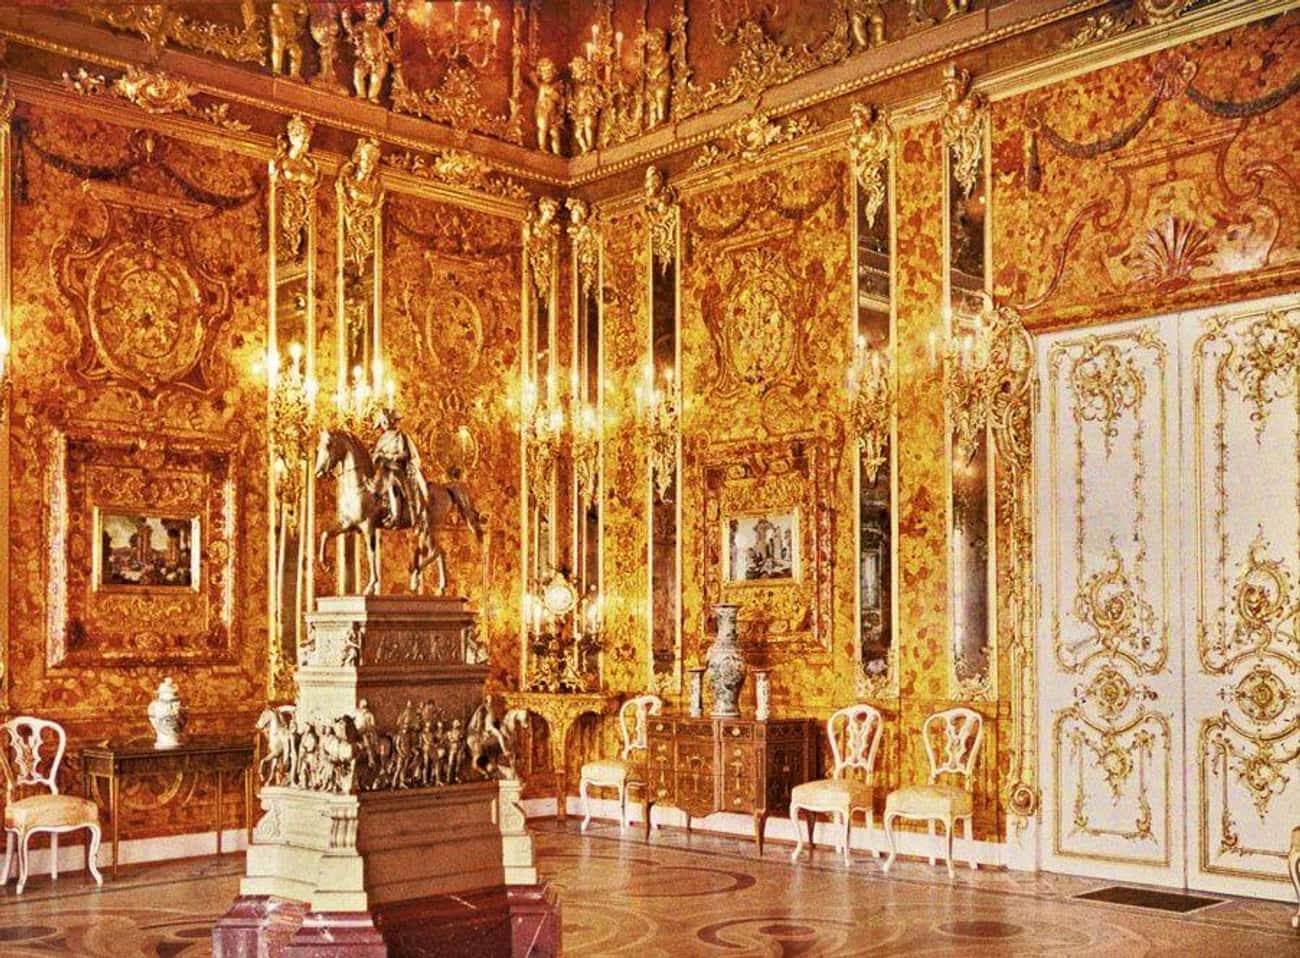 Where Did The Amber Room Go?